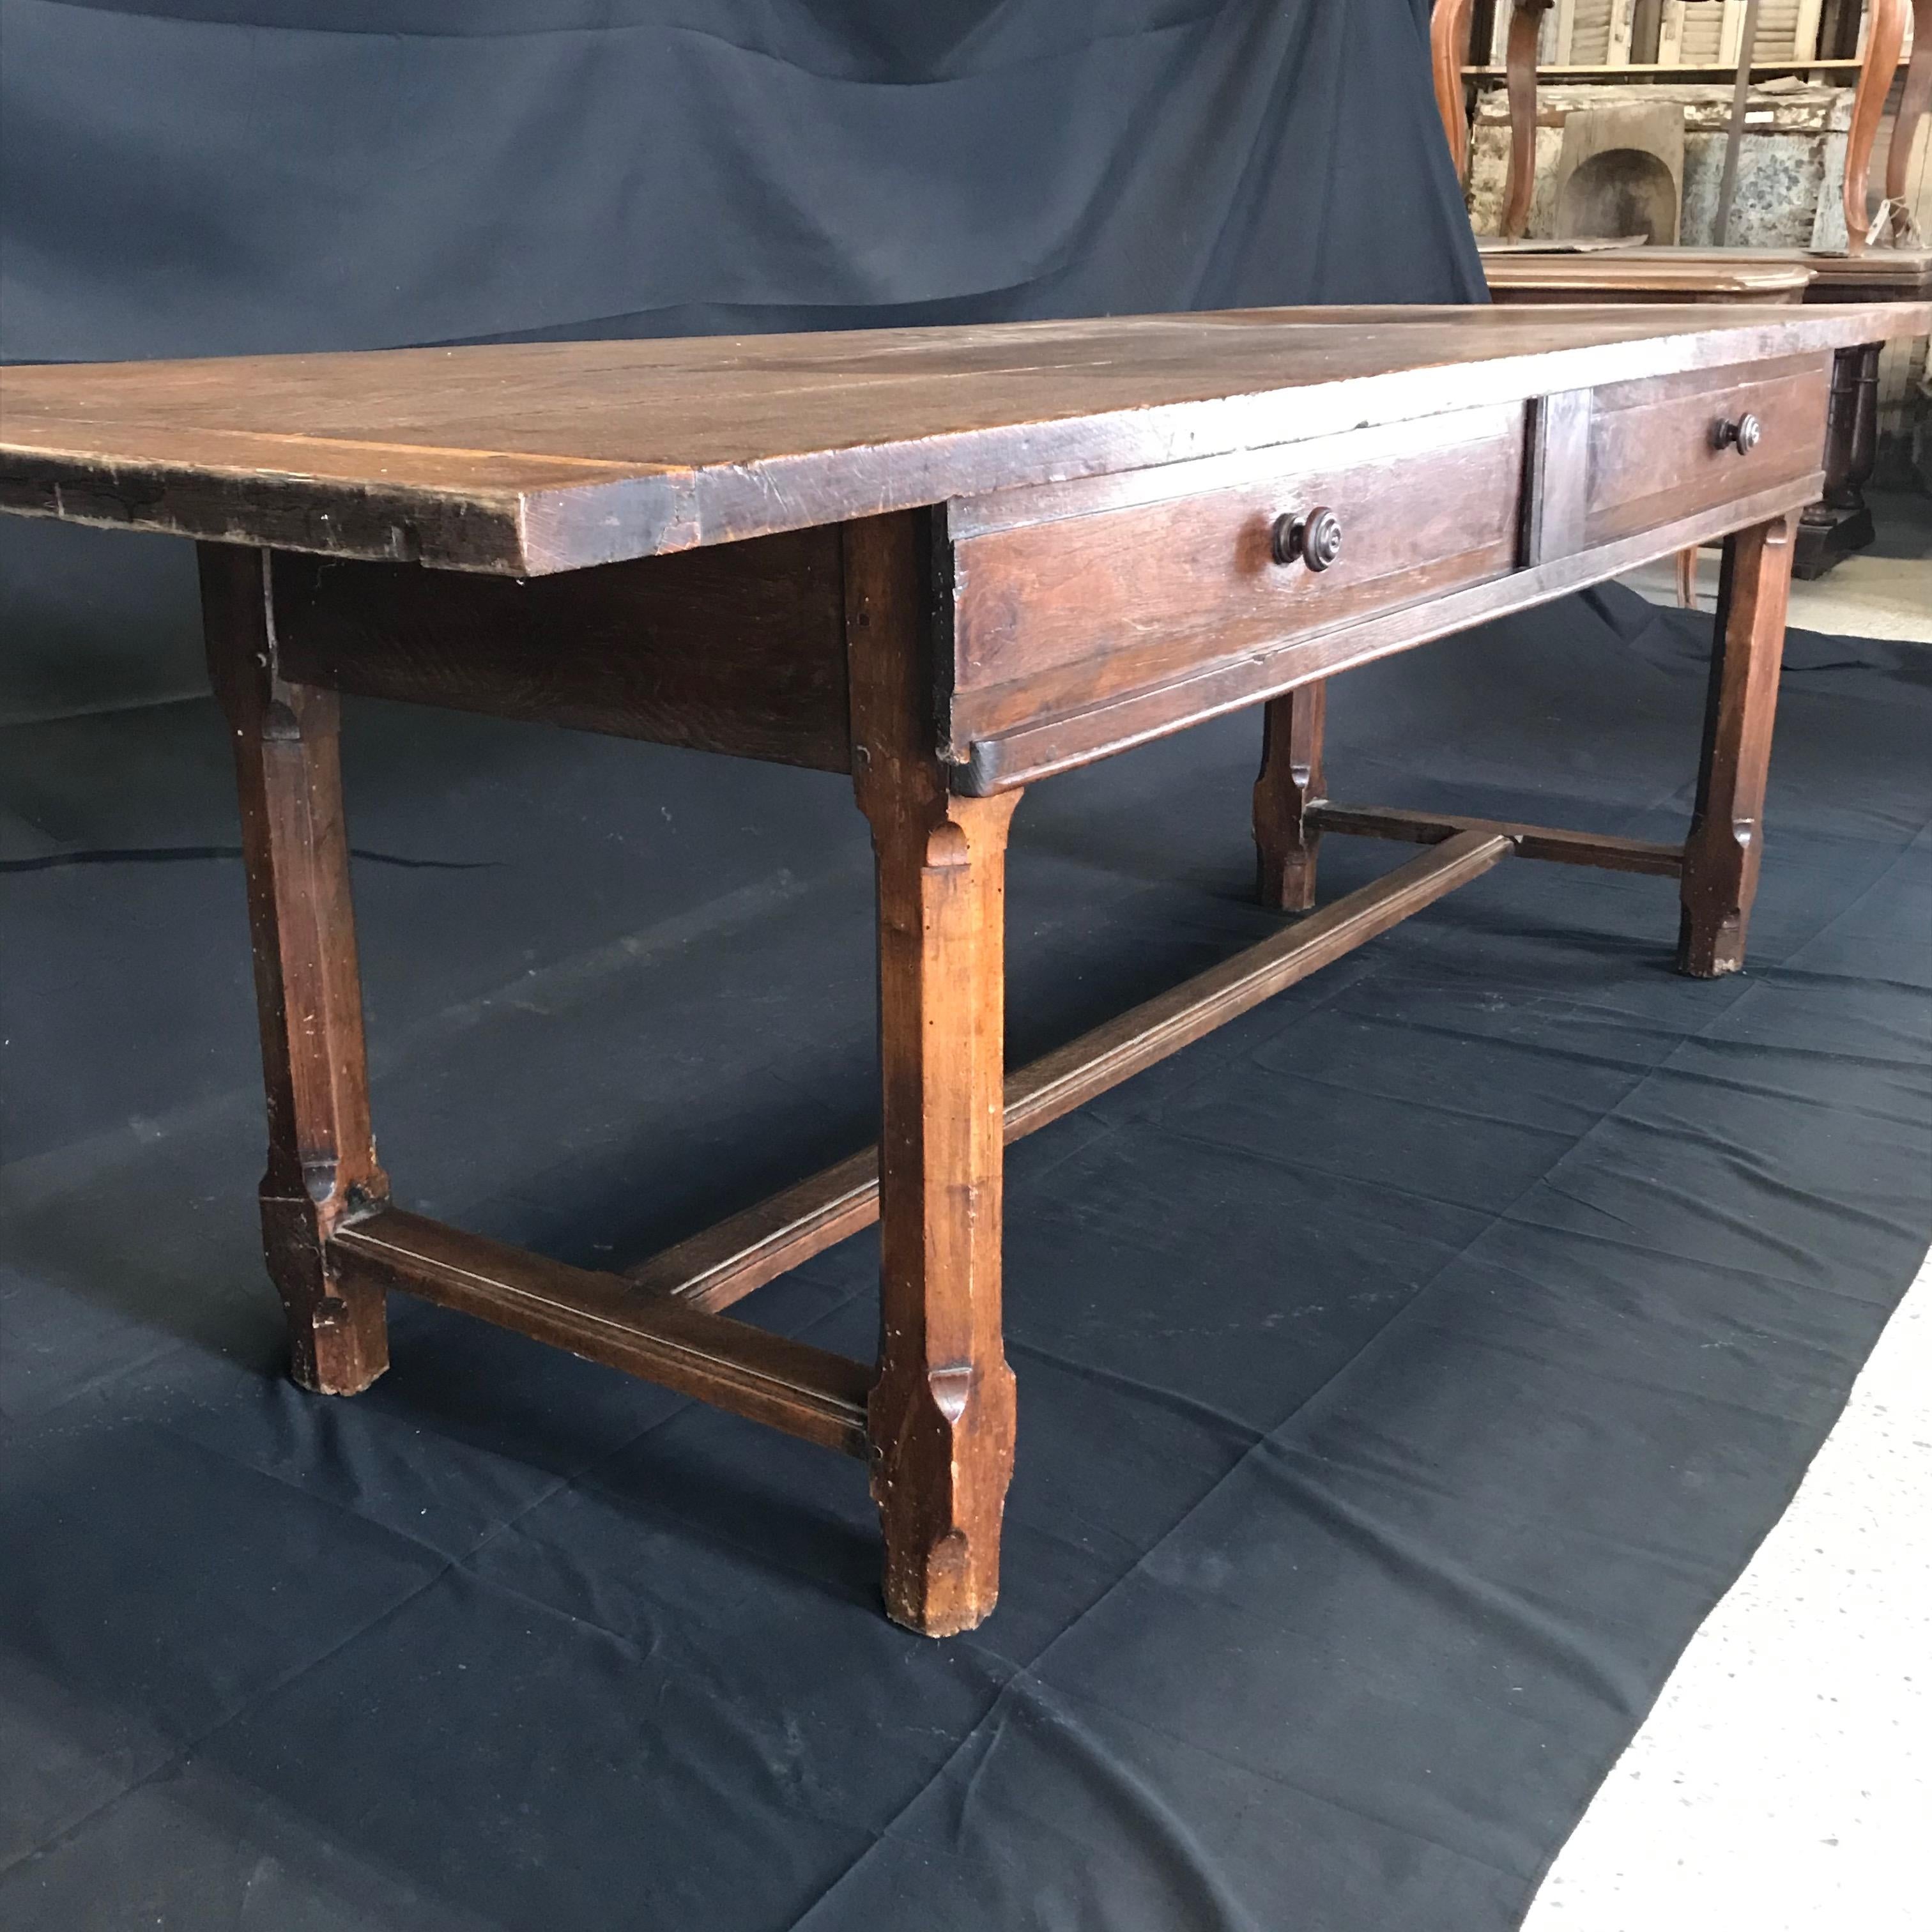 French Provincial Brilliantly Charming Early 19th Century Oak Farm Table with Sliding Drawers